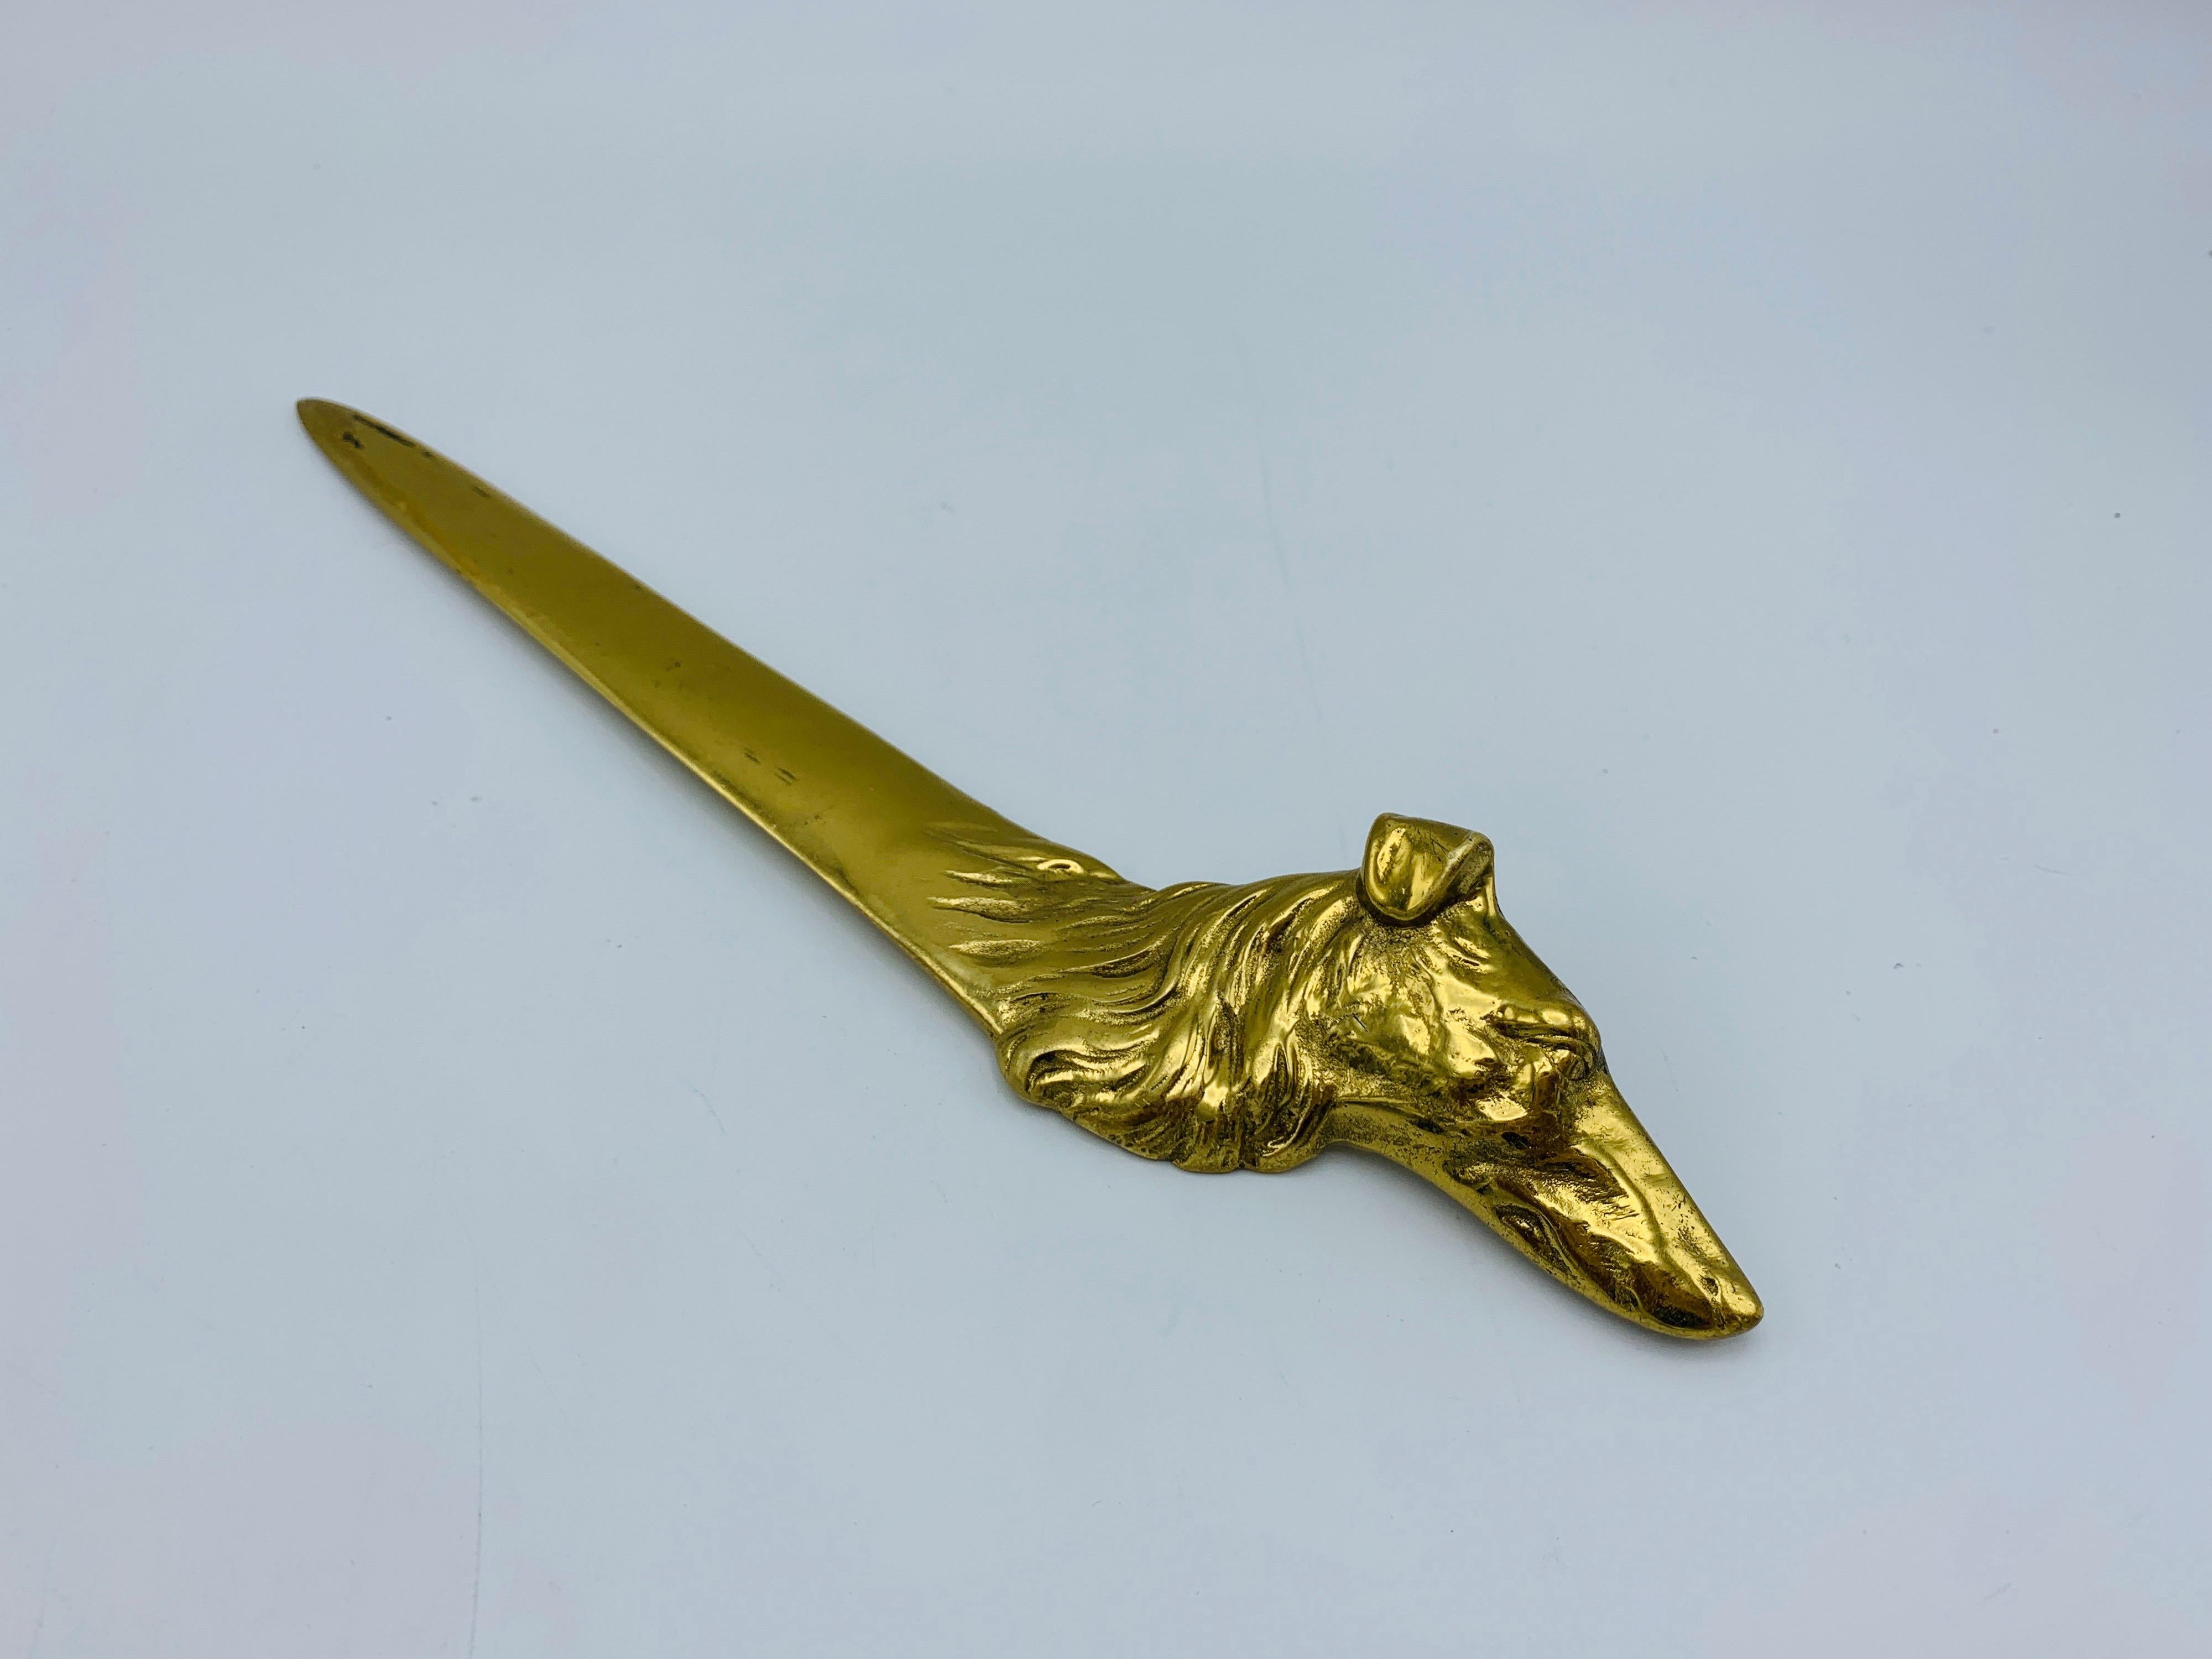 Listed is a gorgeous, 1960s Virginia Metalcrafters solid-brass letter opener. The pieces handle is a dimensional Collie canine sculpture. Heavy, weighing .7lbs. Marked on the backside with Virginia Metalcrafters signature “VMC” stamp.

“Since 1890,